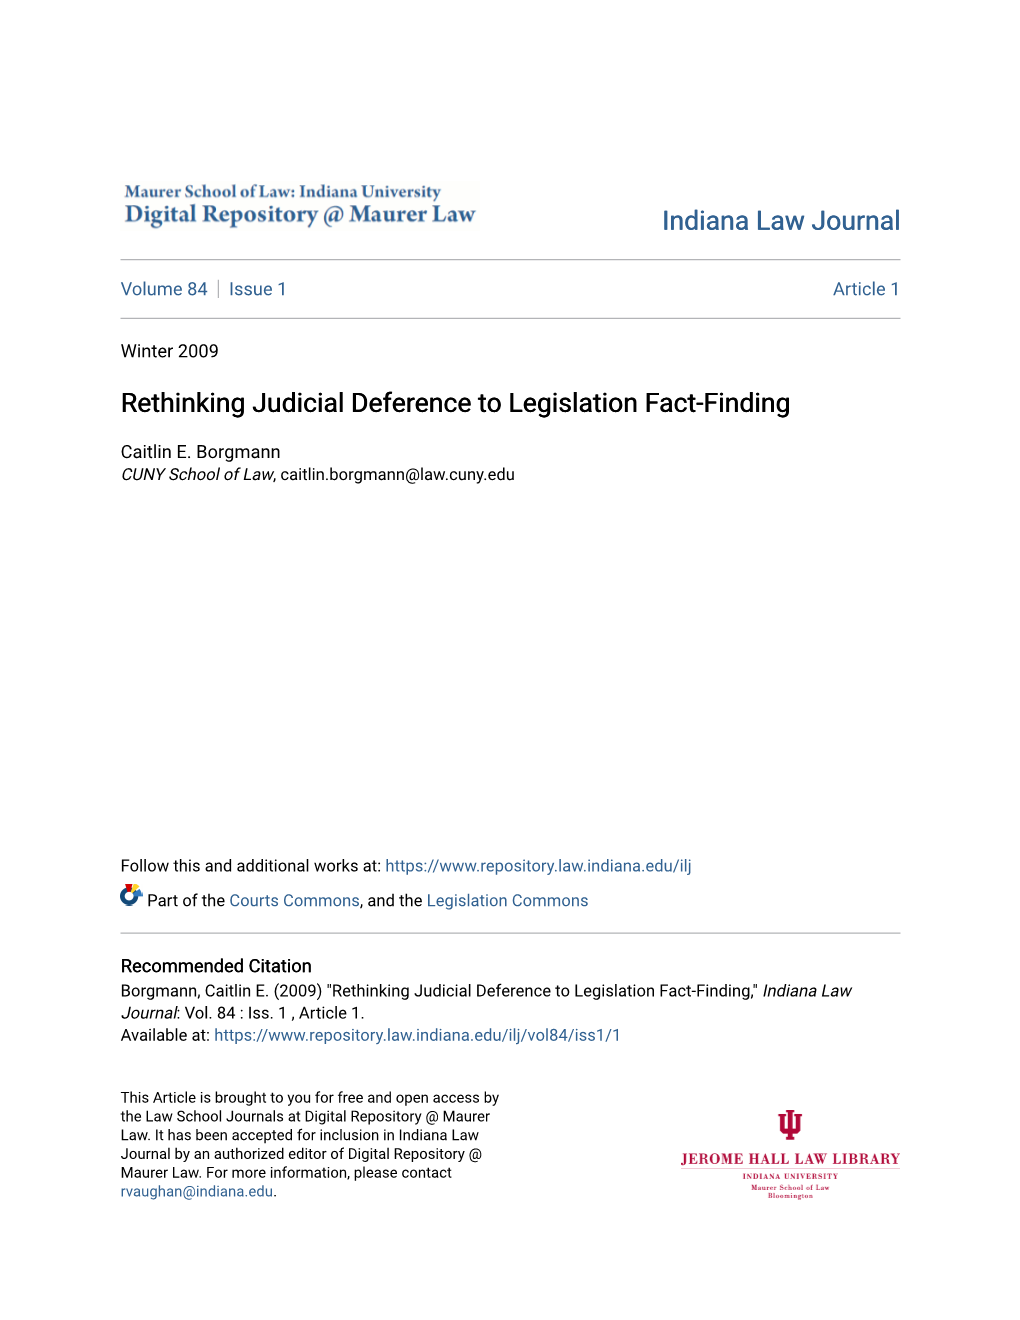 Rethinking Judicial Deference to Legislation Fact-Finding